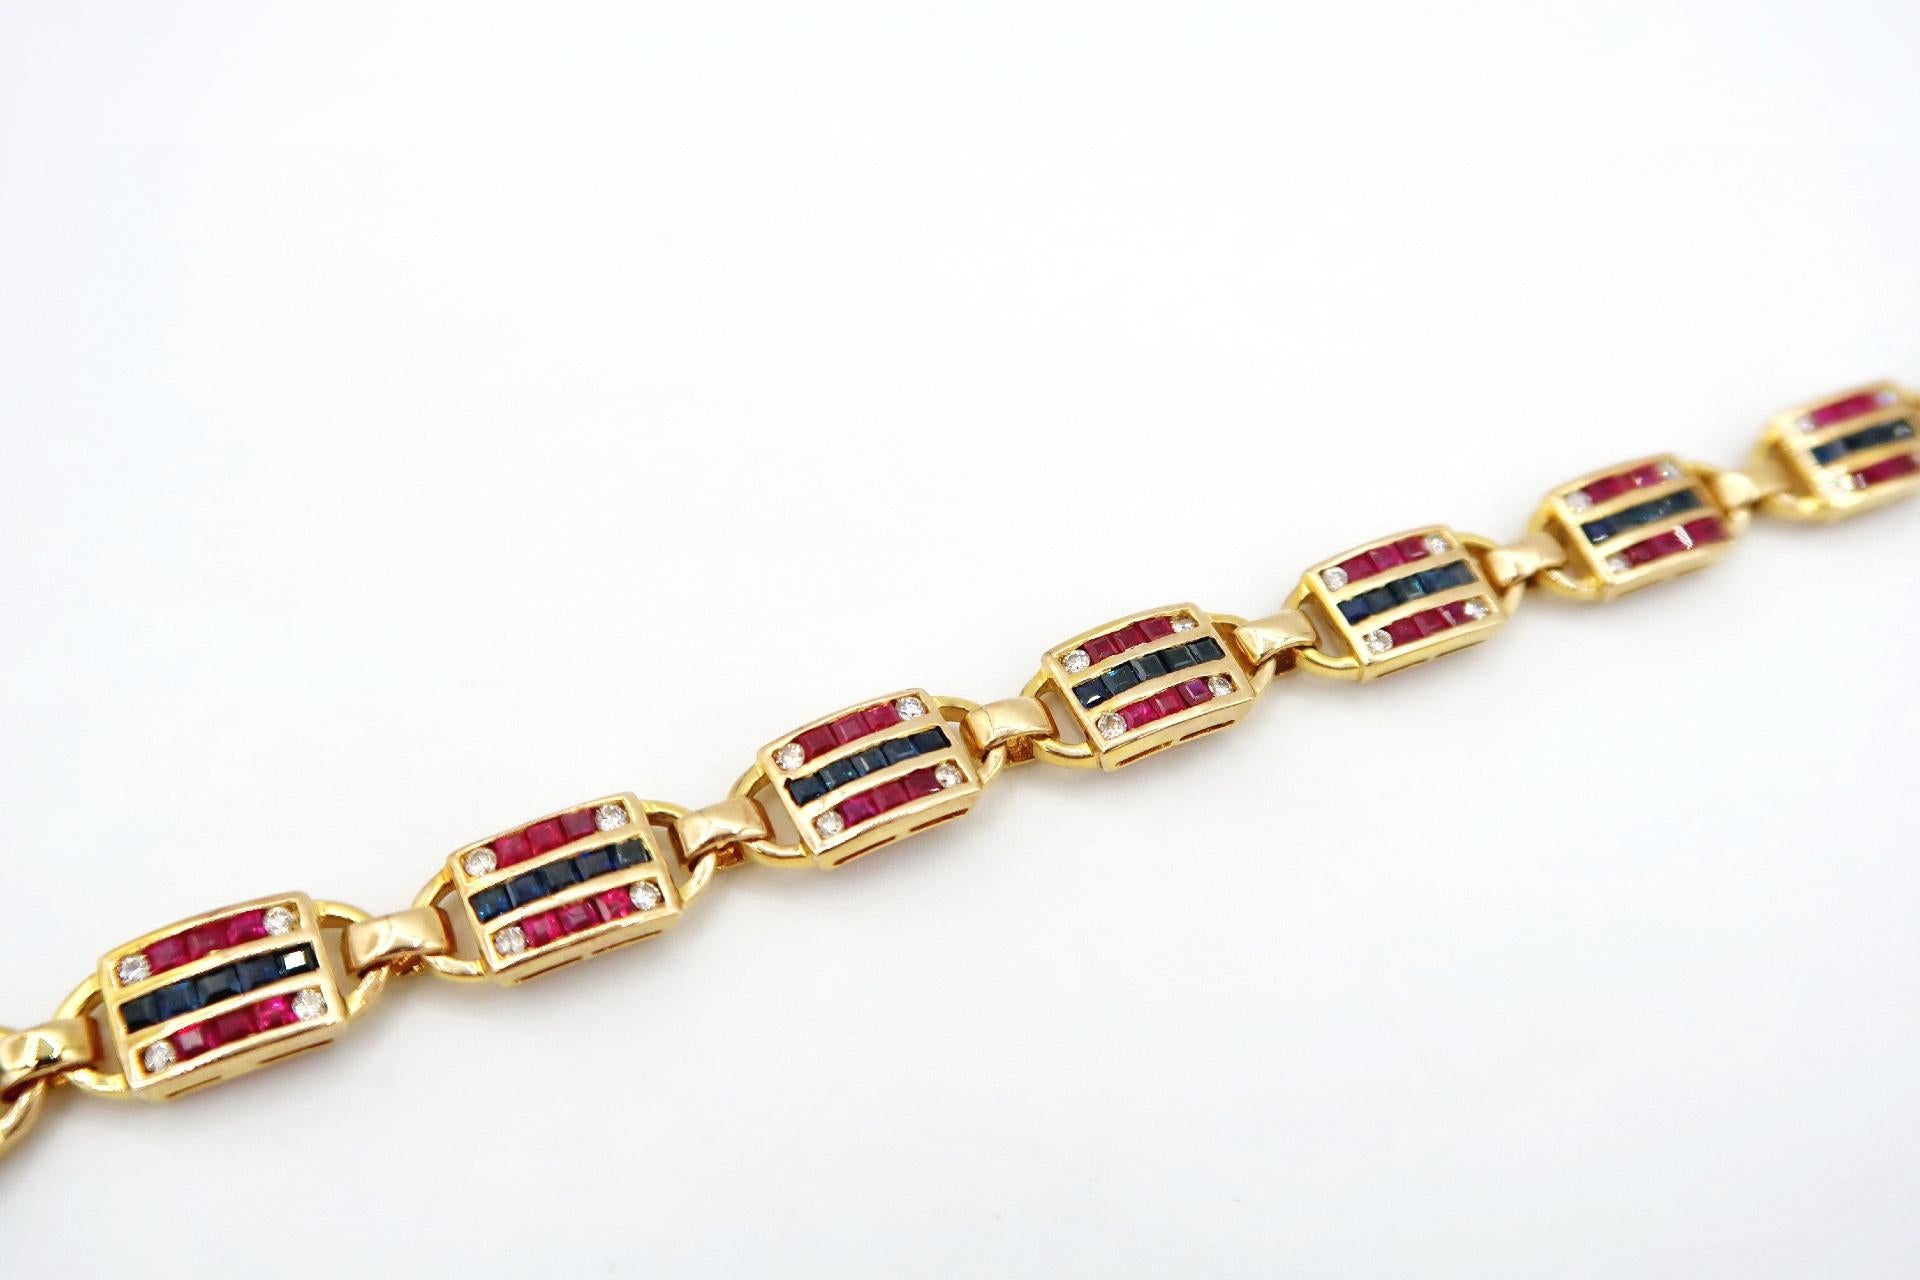 Vibrant Square Ruby Blue Sapphire Diamond Striped Banner Link Bracelet in 18K Yellow Gold

Gold: 18K Yellow Gold, 18.65 g
Ruby: Square, 3.13 ct
Sapphire: Square, 2.42 ct
Diamond: Round, 0.60 ct

Length: 7 inches